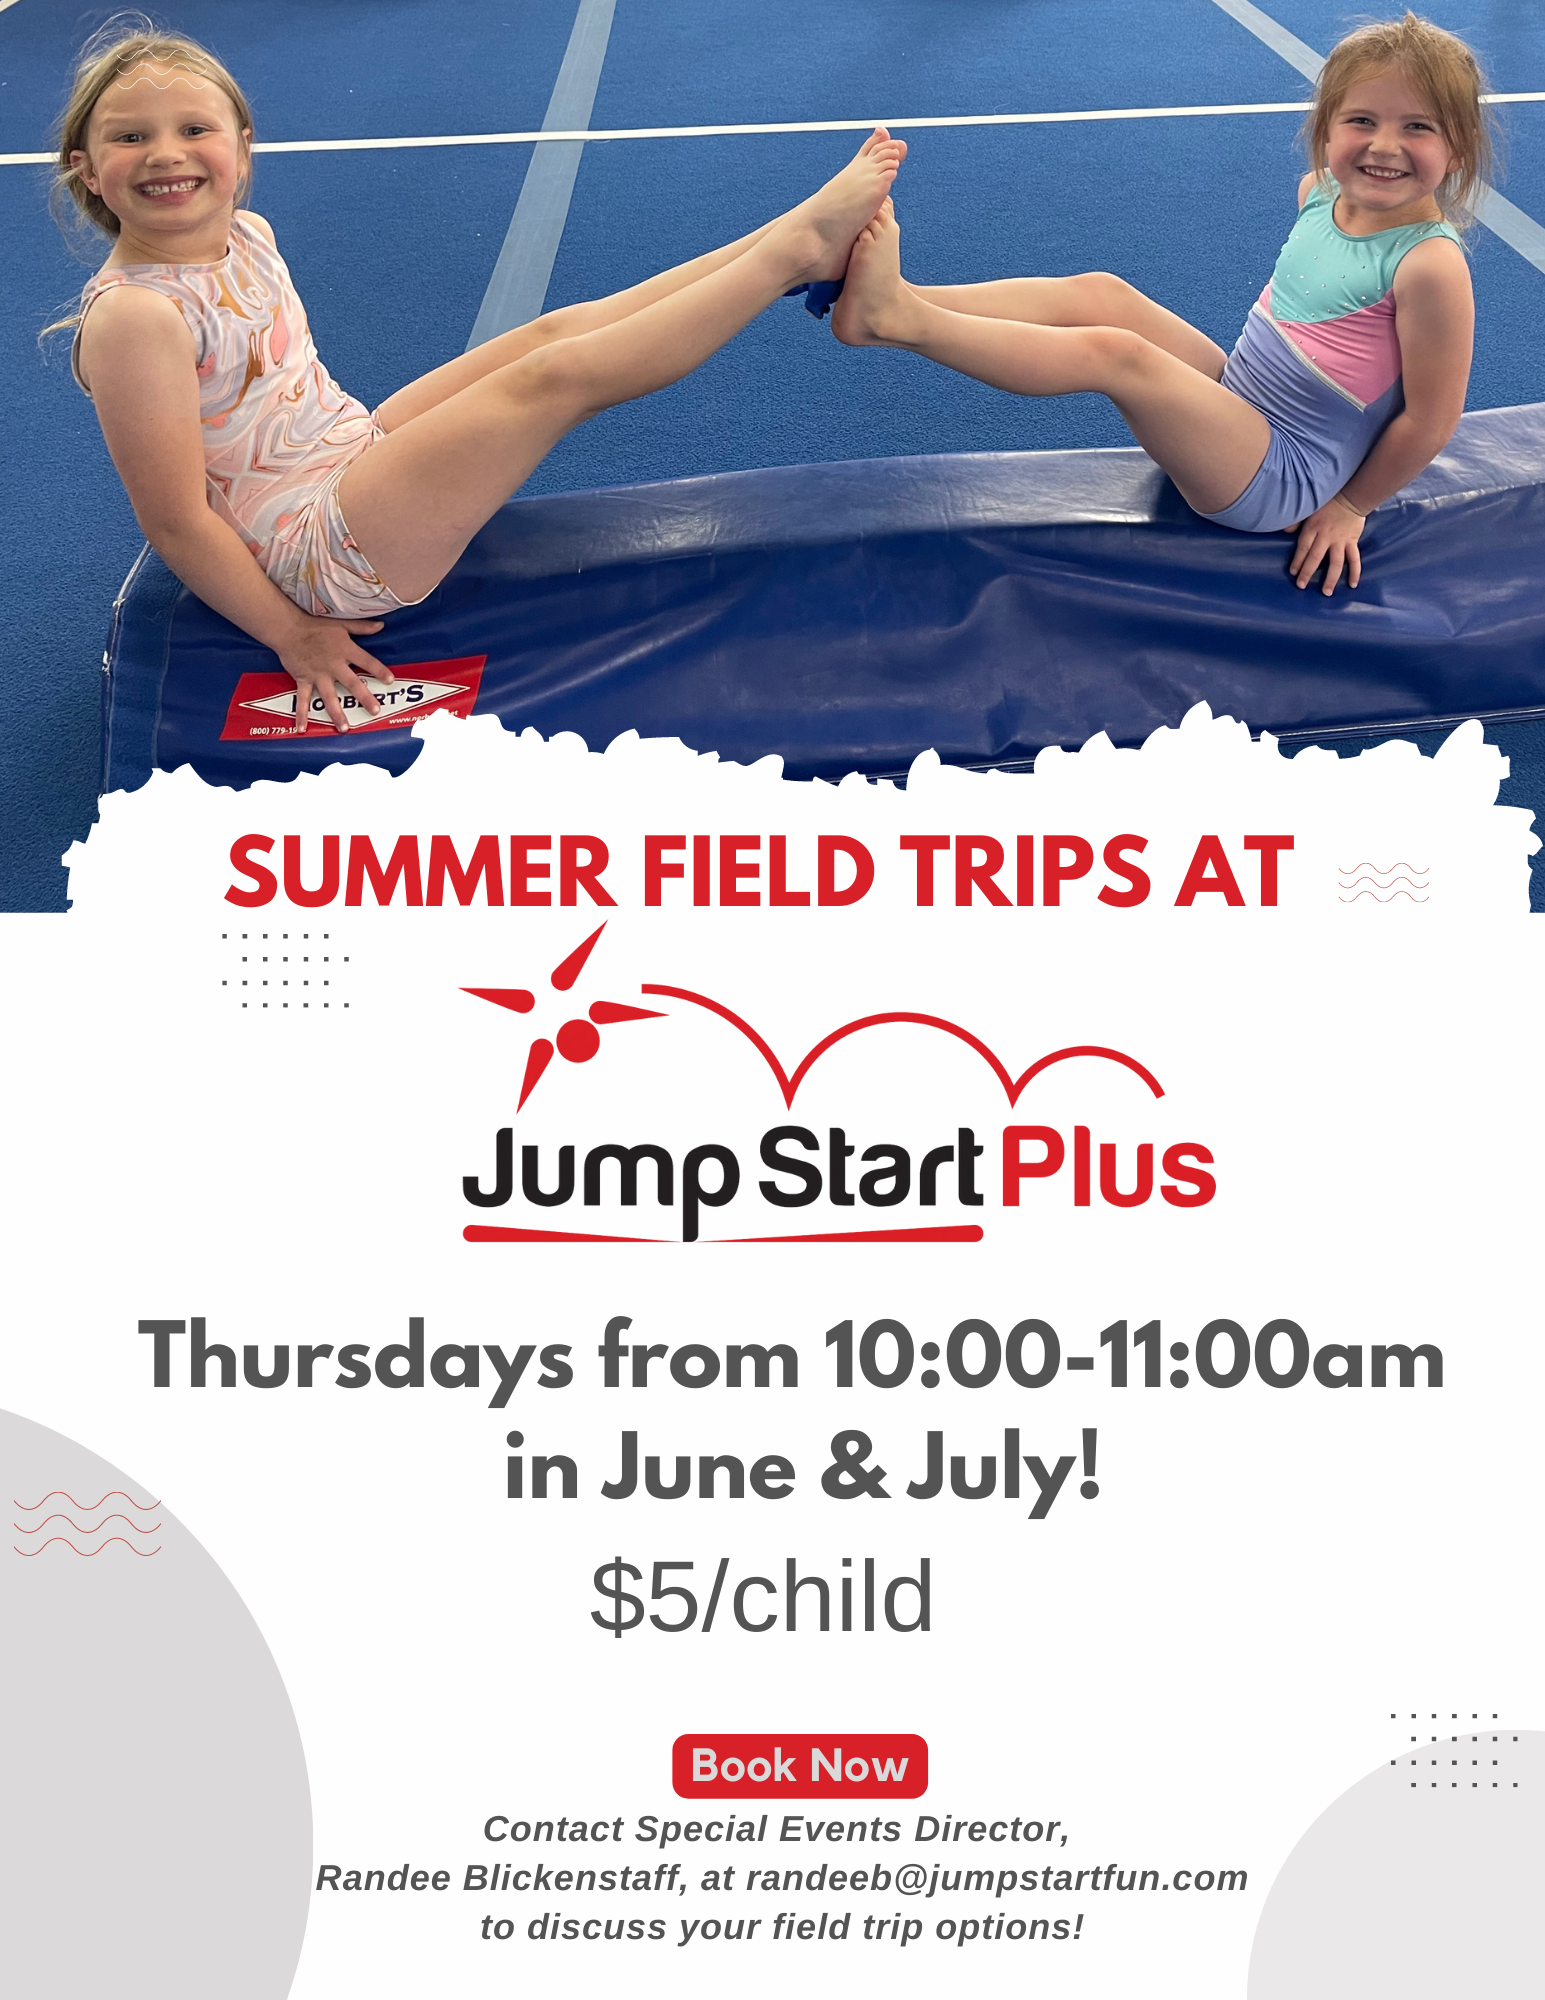 Summer field trips at